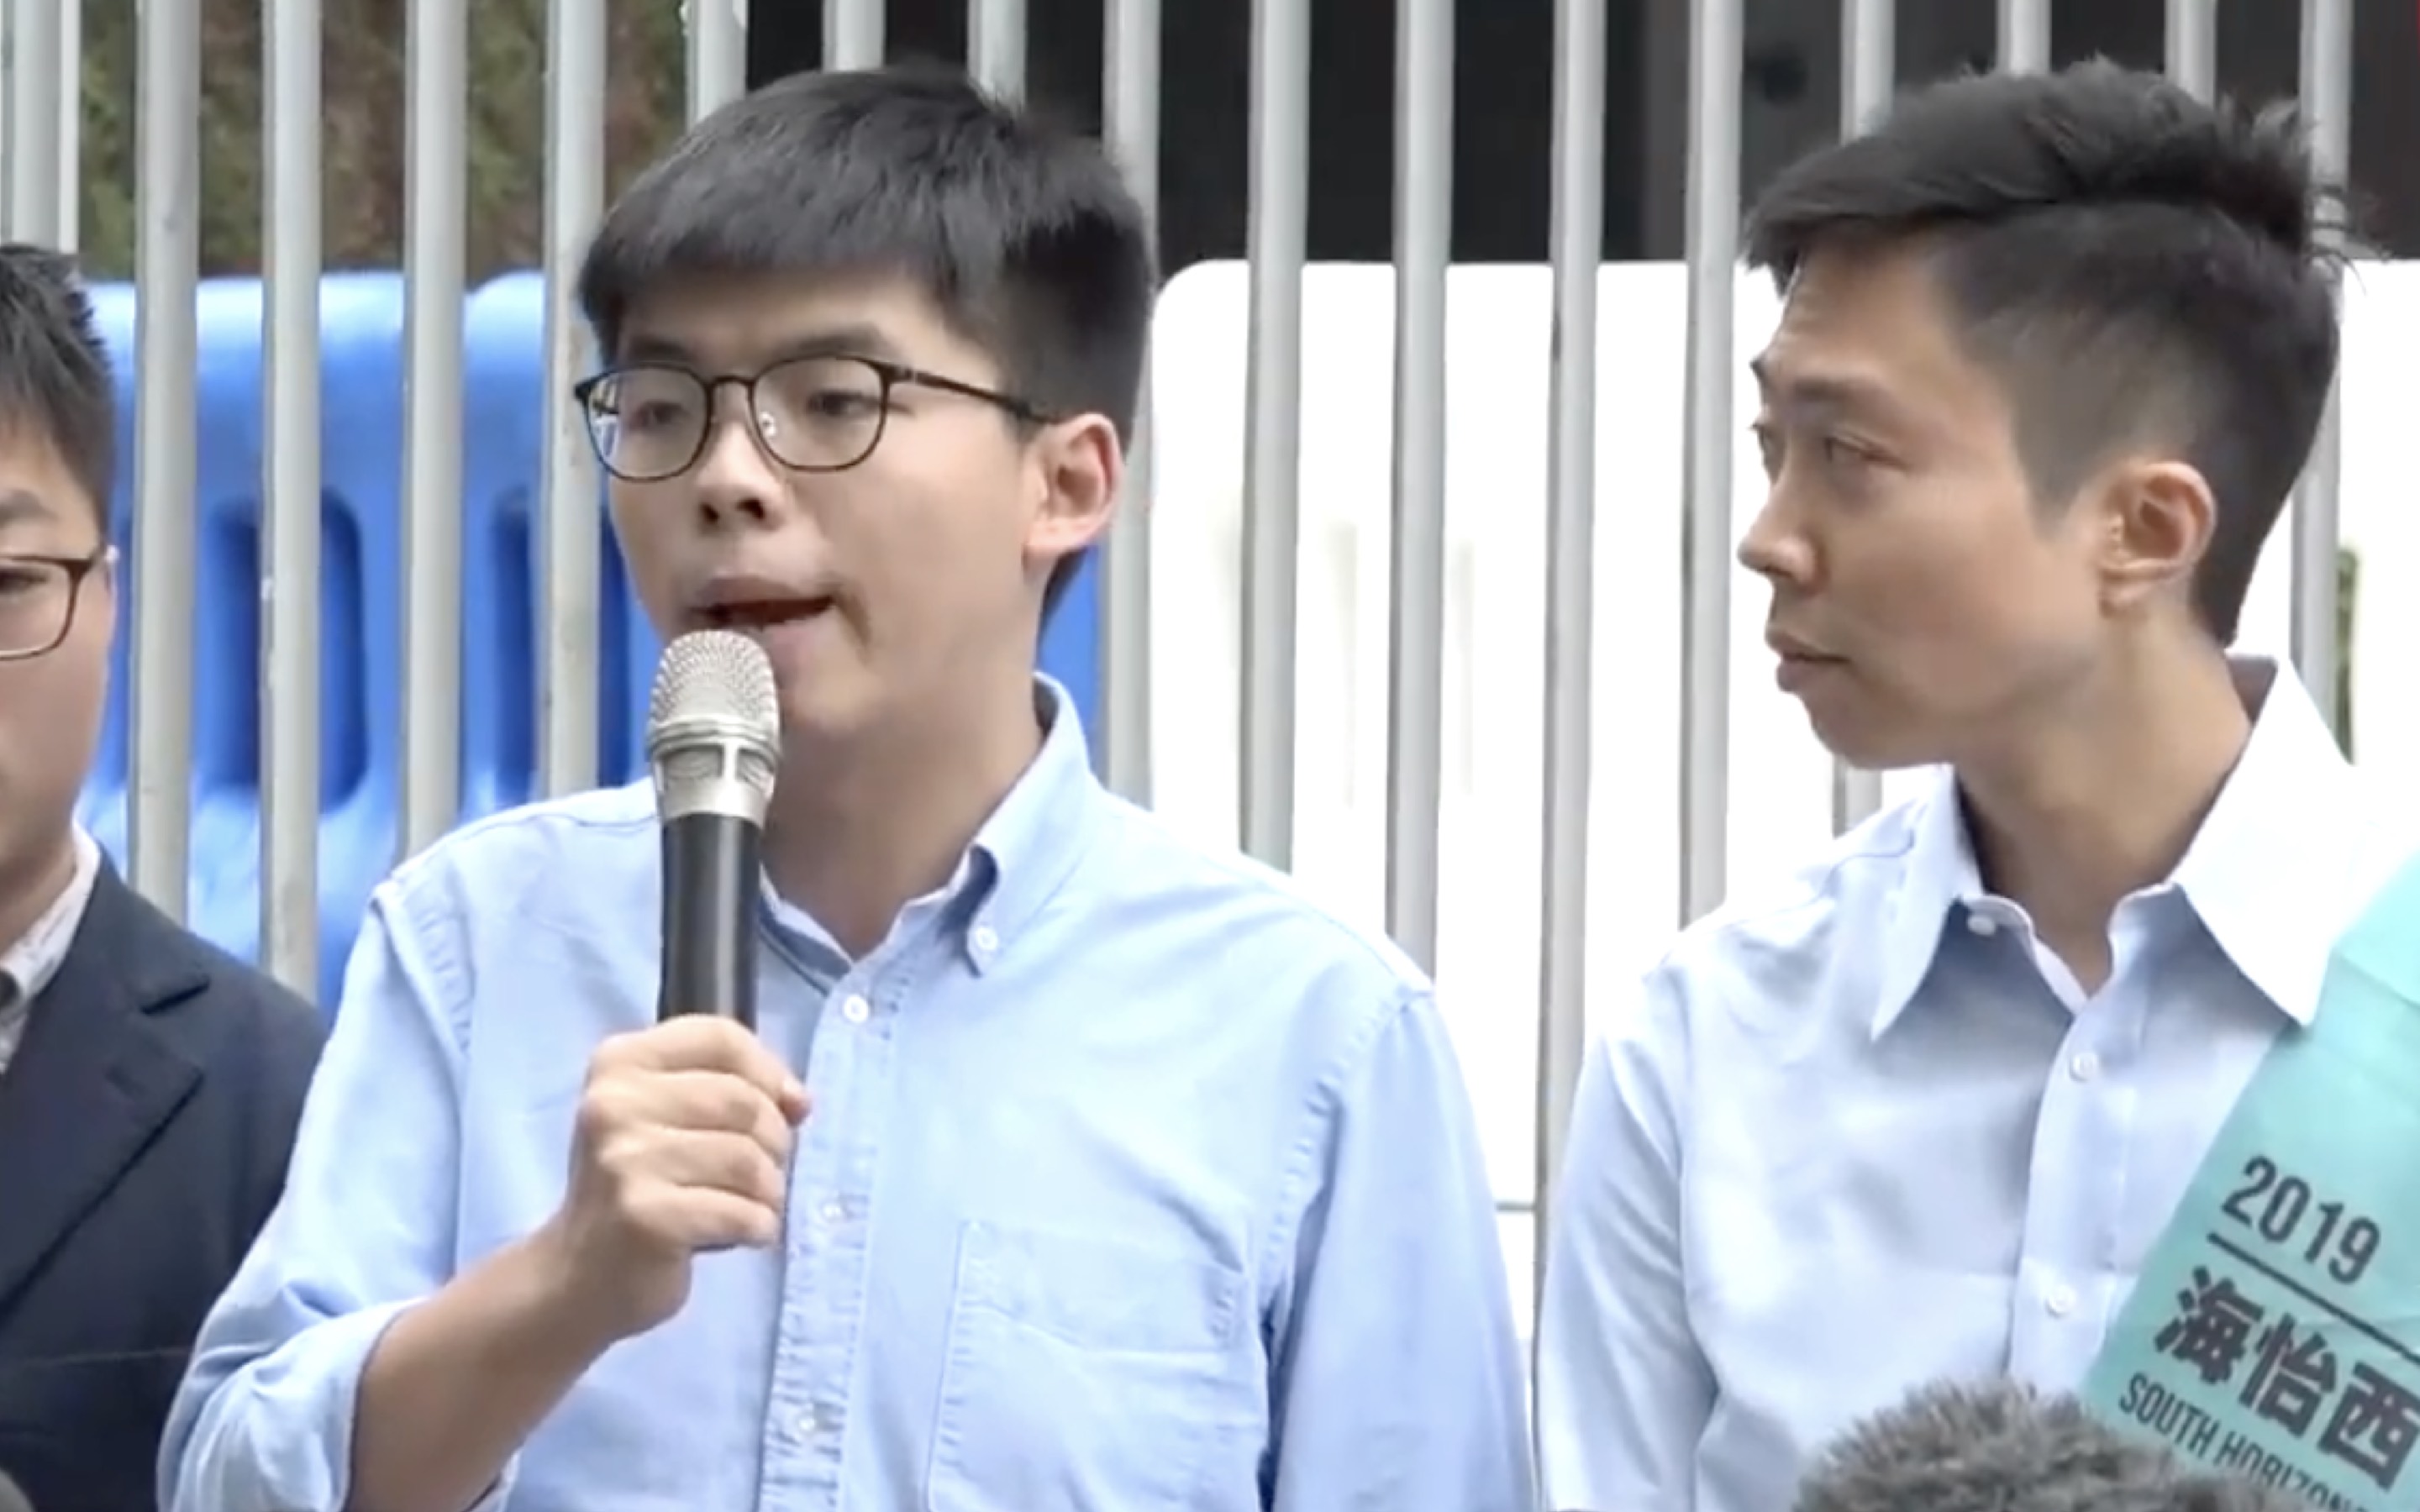 Joshua Wong (left) speaks to reporters hours after a returning officer barred him from running in the upcoming district council elections on Nov. 24. He urged voters to support the pro-democracy side’s ‘plan B candidate’ Kelvin Lam (right). Screengrab via YouTube/Apple Daily.